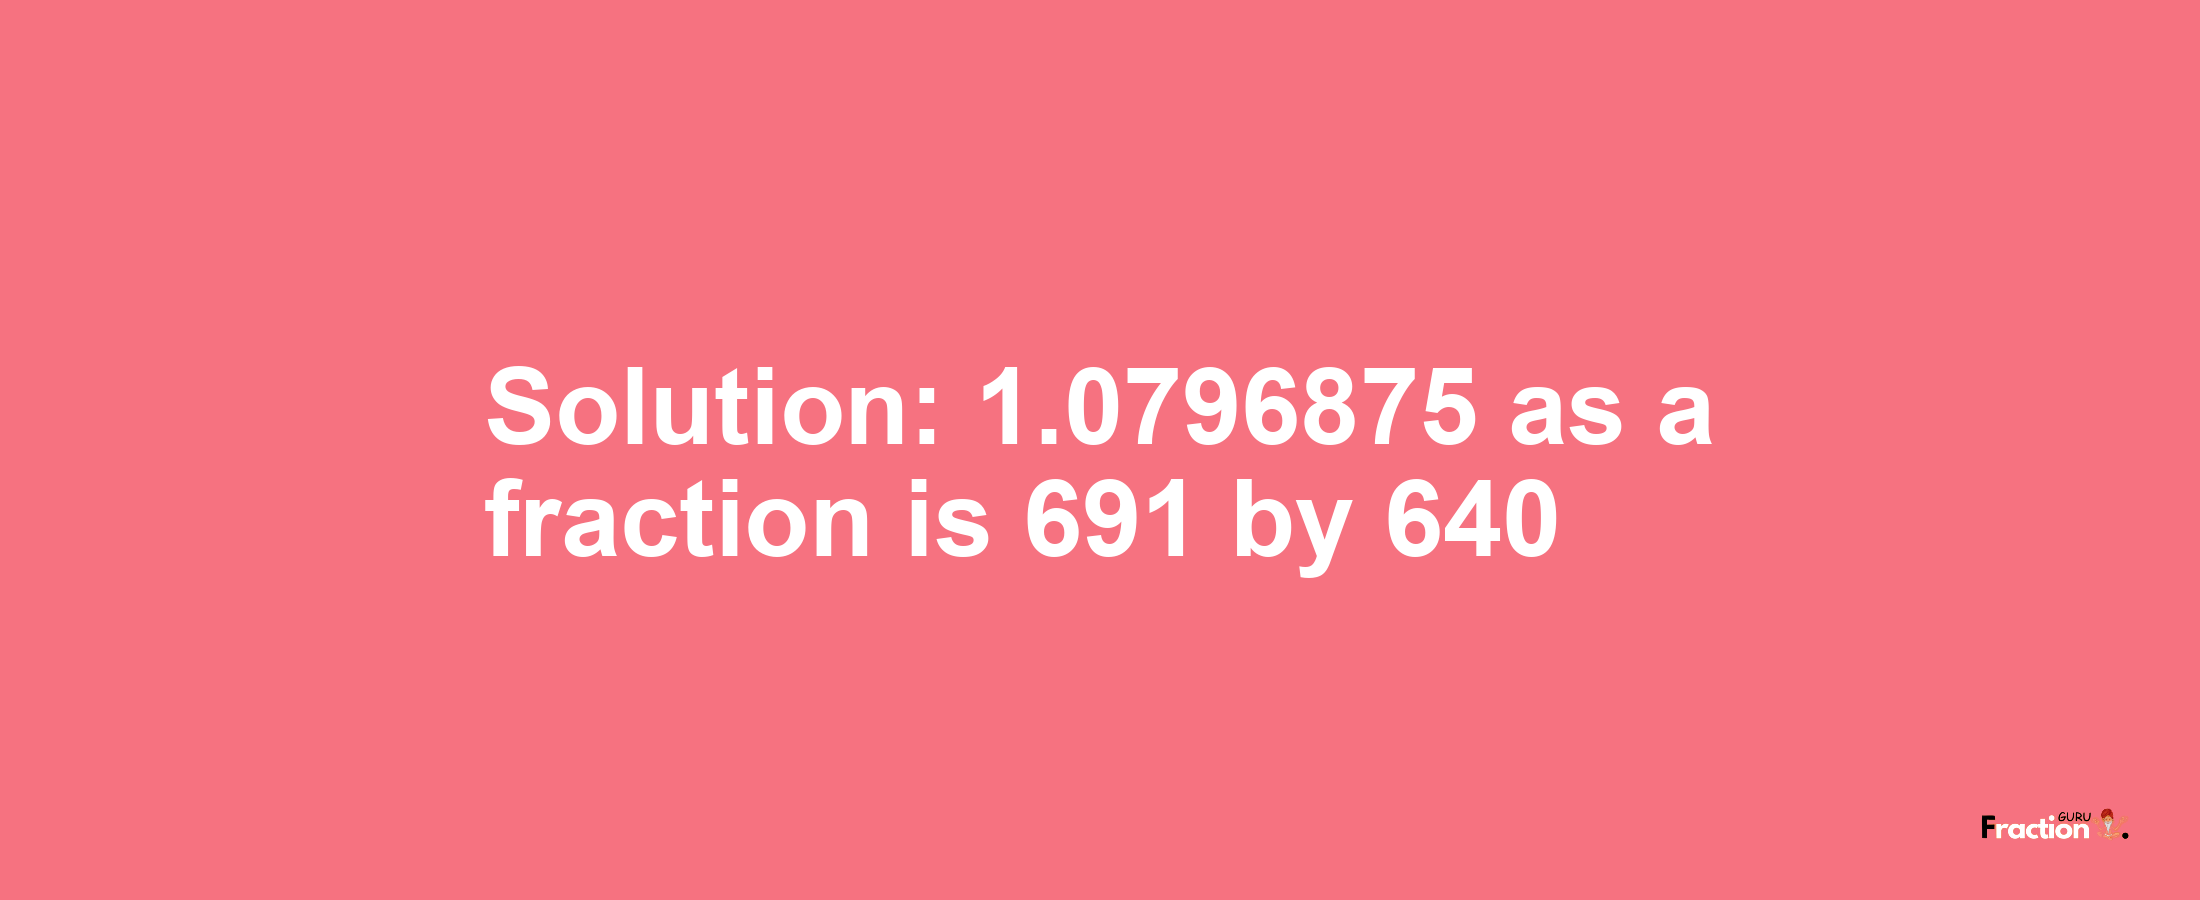 Solution:1.0796875 as a fraction is 691/640